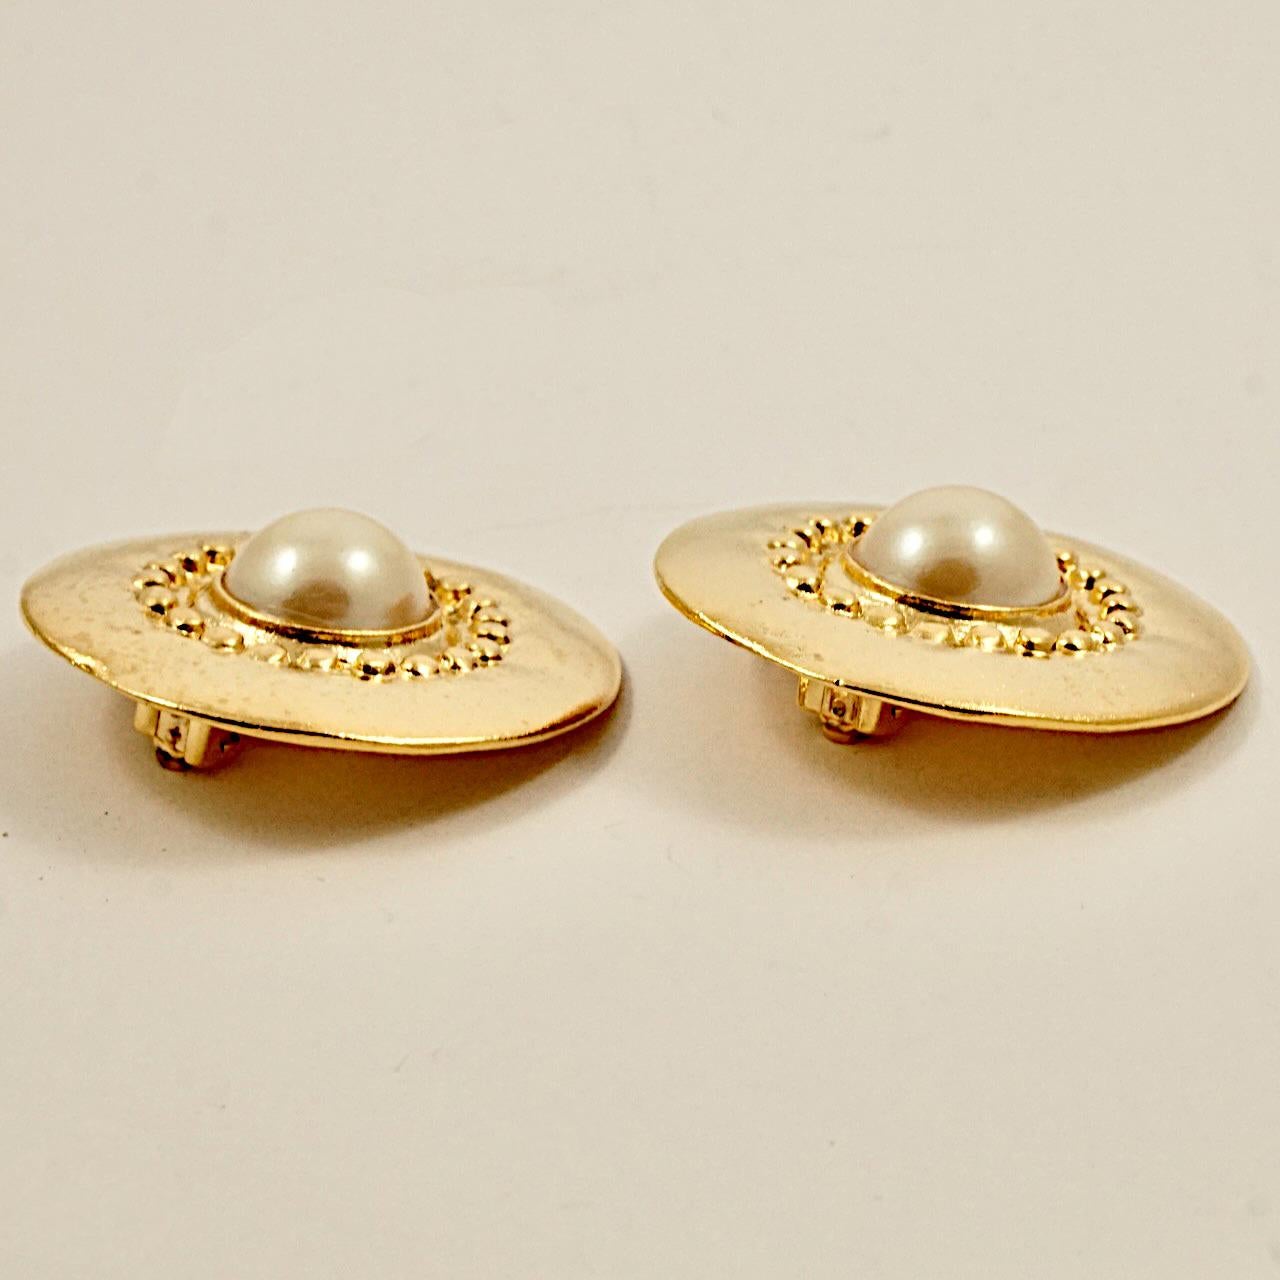 Gold plated clip on earrings, featuring cream faux pearls encircled by gold domes. Measuring diameter 3.8 cm / 1.5 inches. The earrings are in very good condition.

This beautiful pair of statement earrings is from the 1980s.